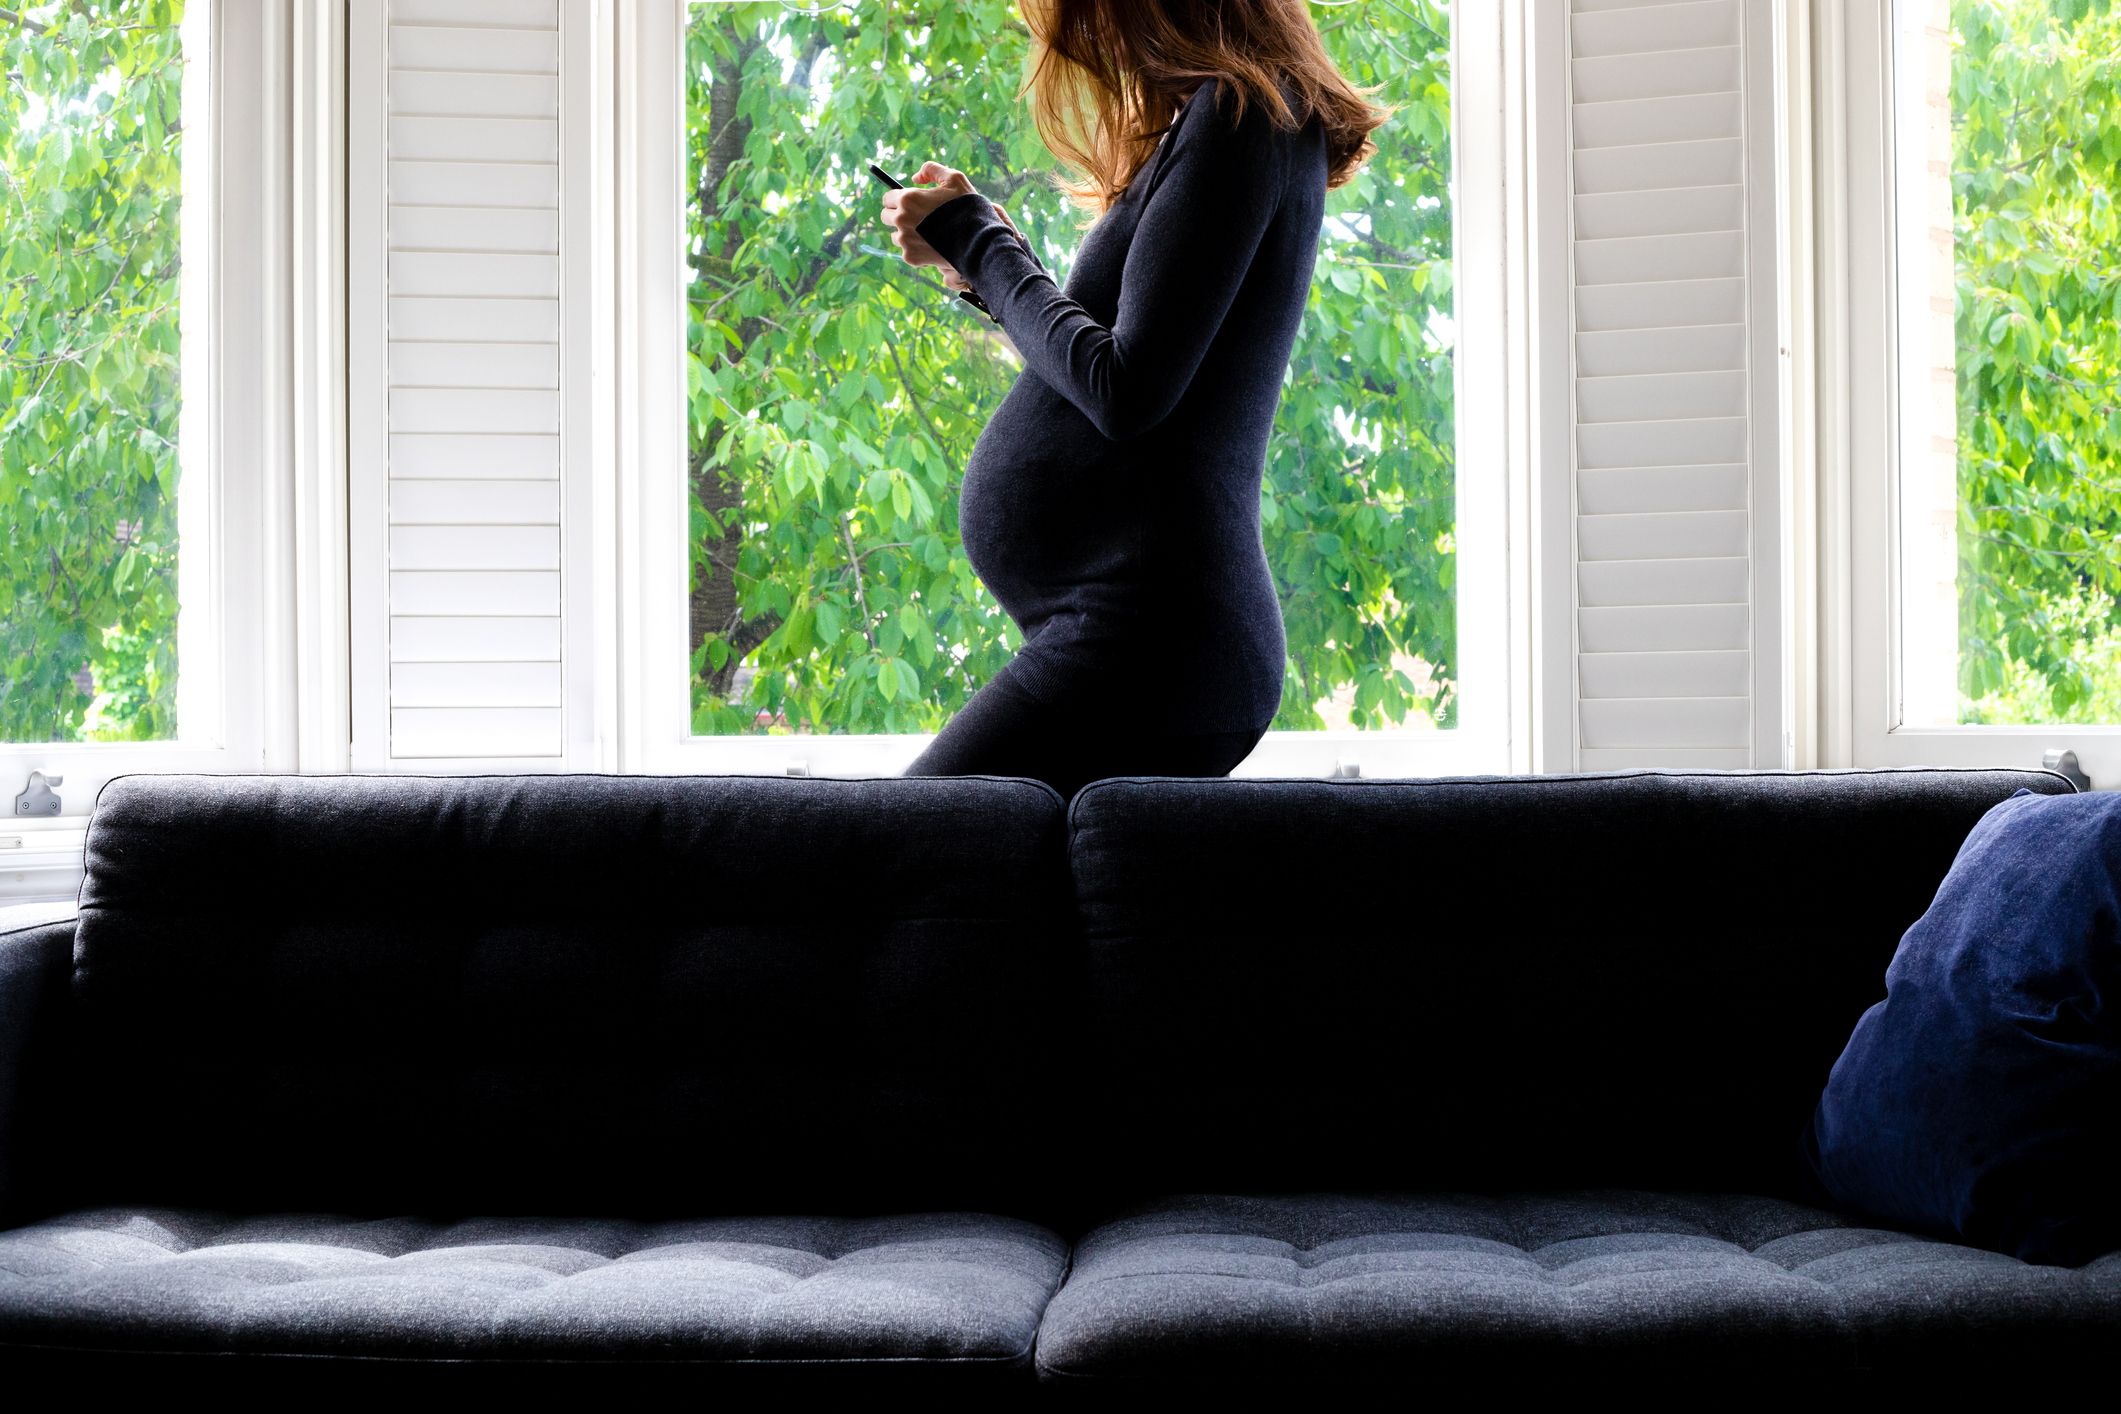 a pregnant woman using cell phone, standing by the window